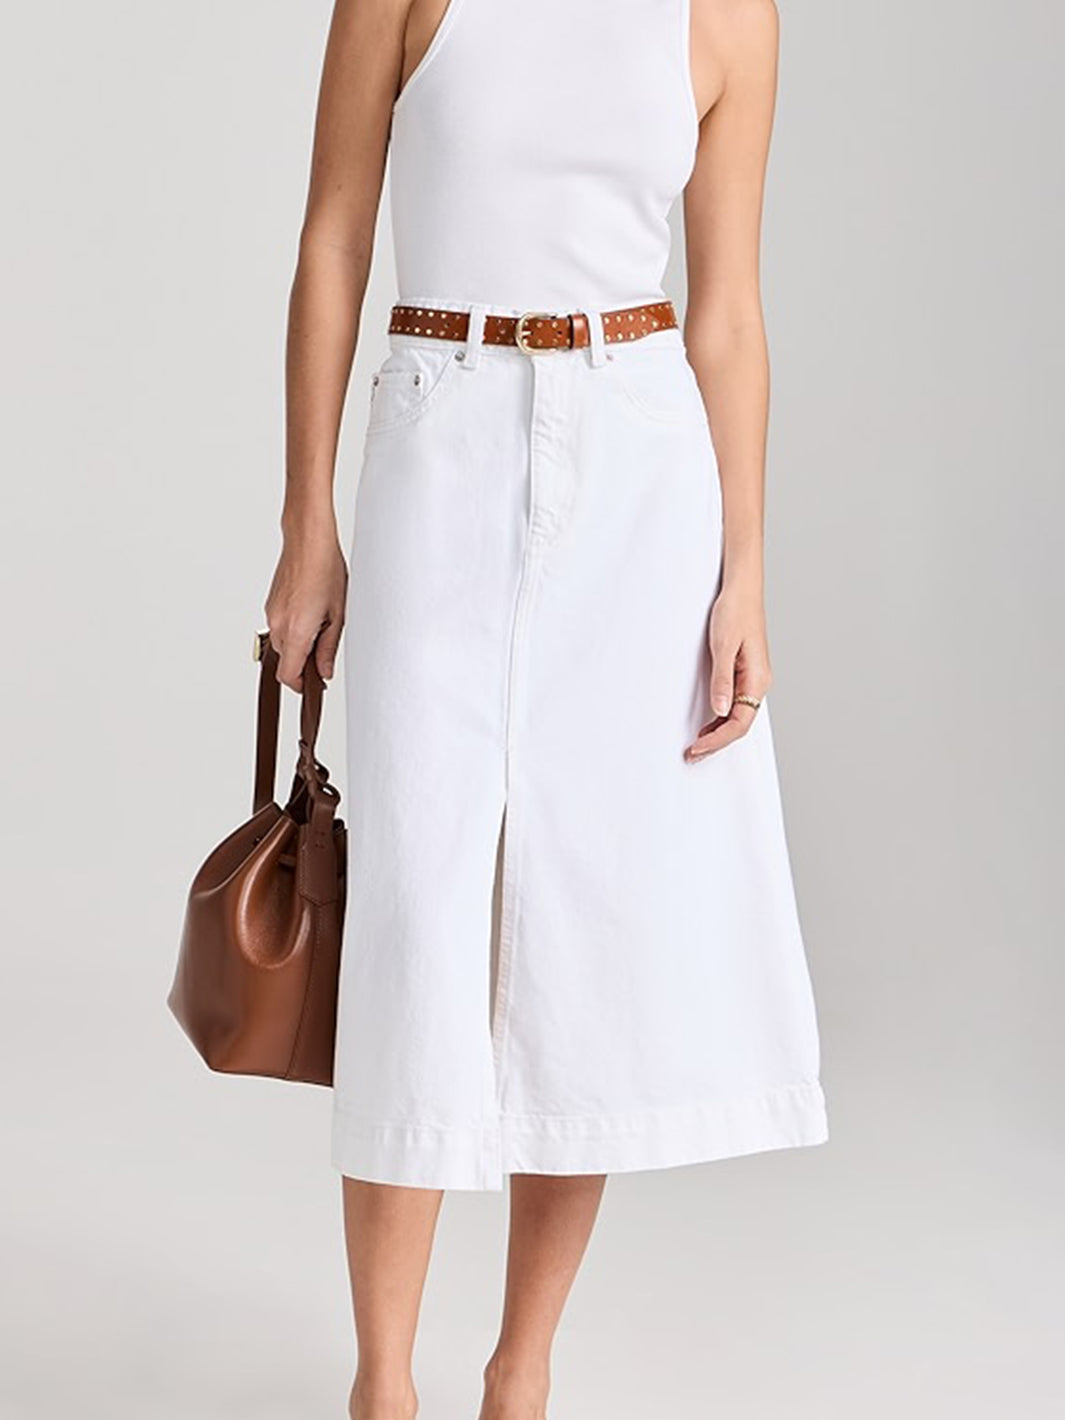 Alma A-LIne Skirt in White